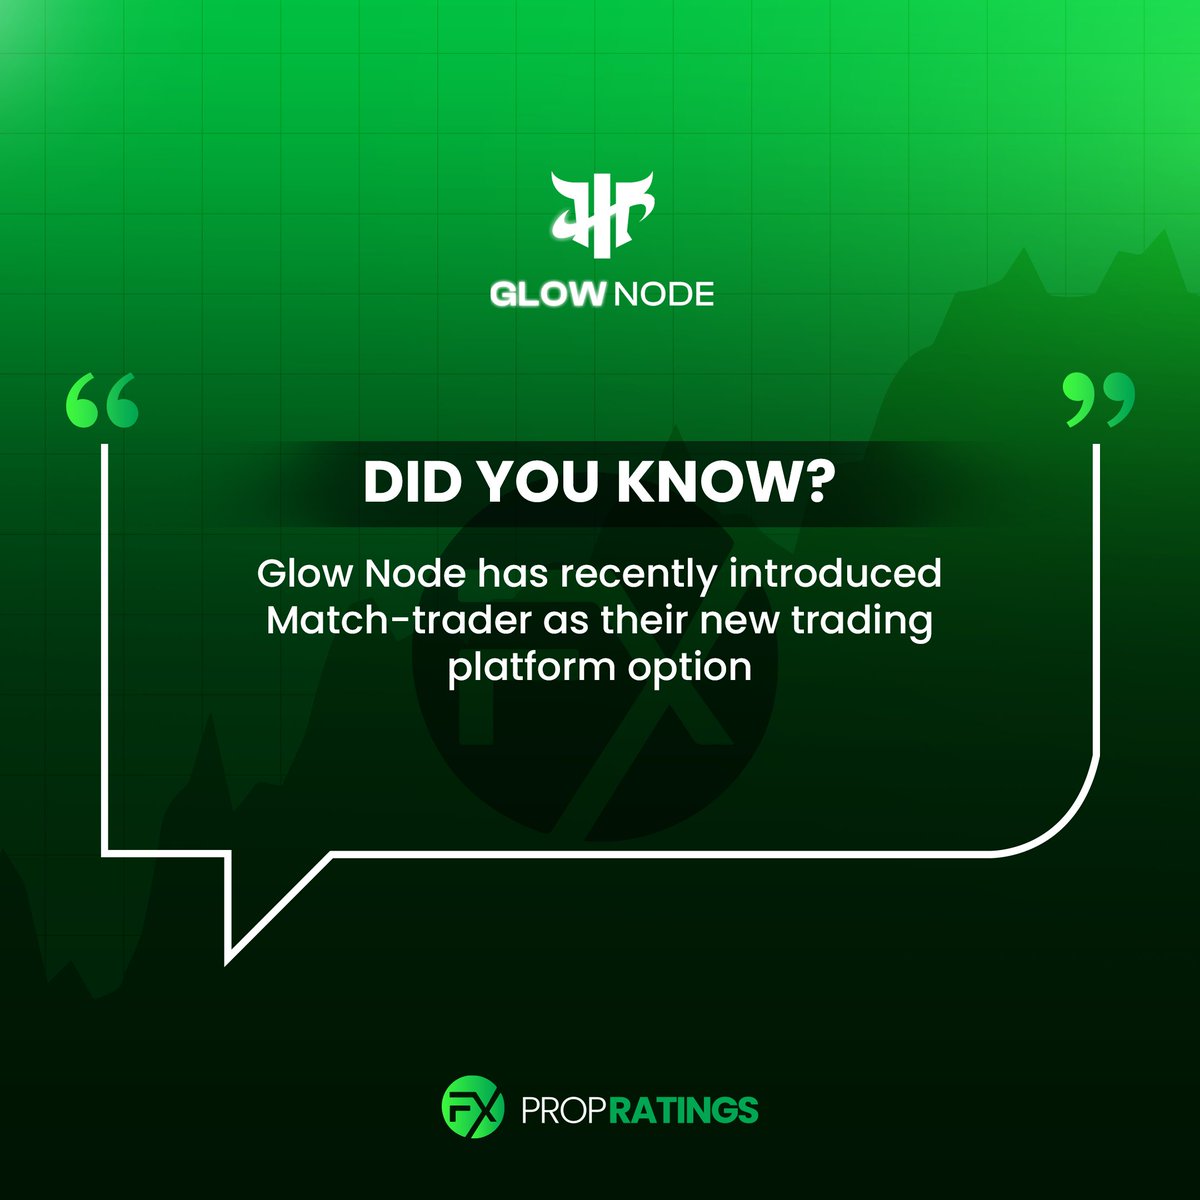 Did you know? 😃
Glow Node has recently introduced Match-Trader as their new trading platform option.
#PropFirms #ForexPropReviews #GlowNode #TradingPlatform